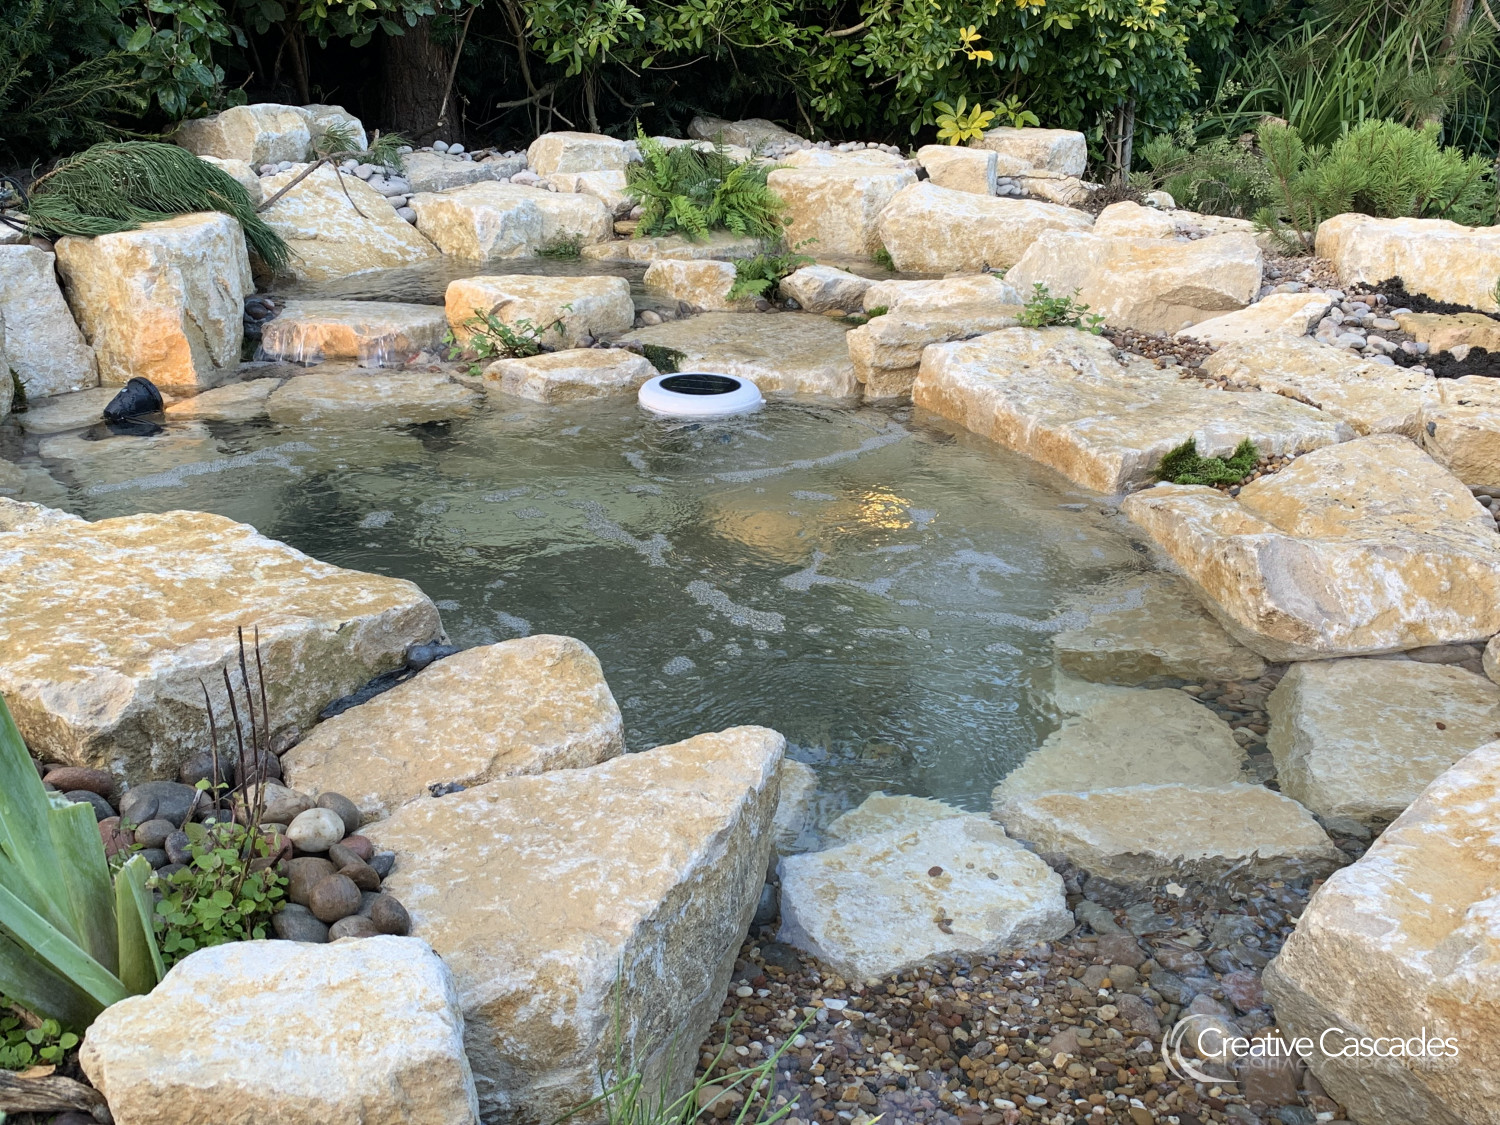 Putting finishing touches to this organic Jacuzzi which can be fitted with a water heater or left as is for bracing dips  - Landscaping and Water Features -  Creative Cascades